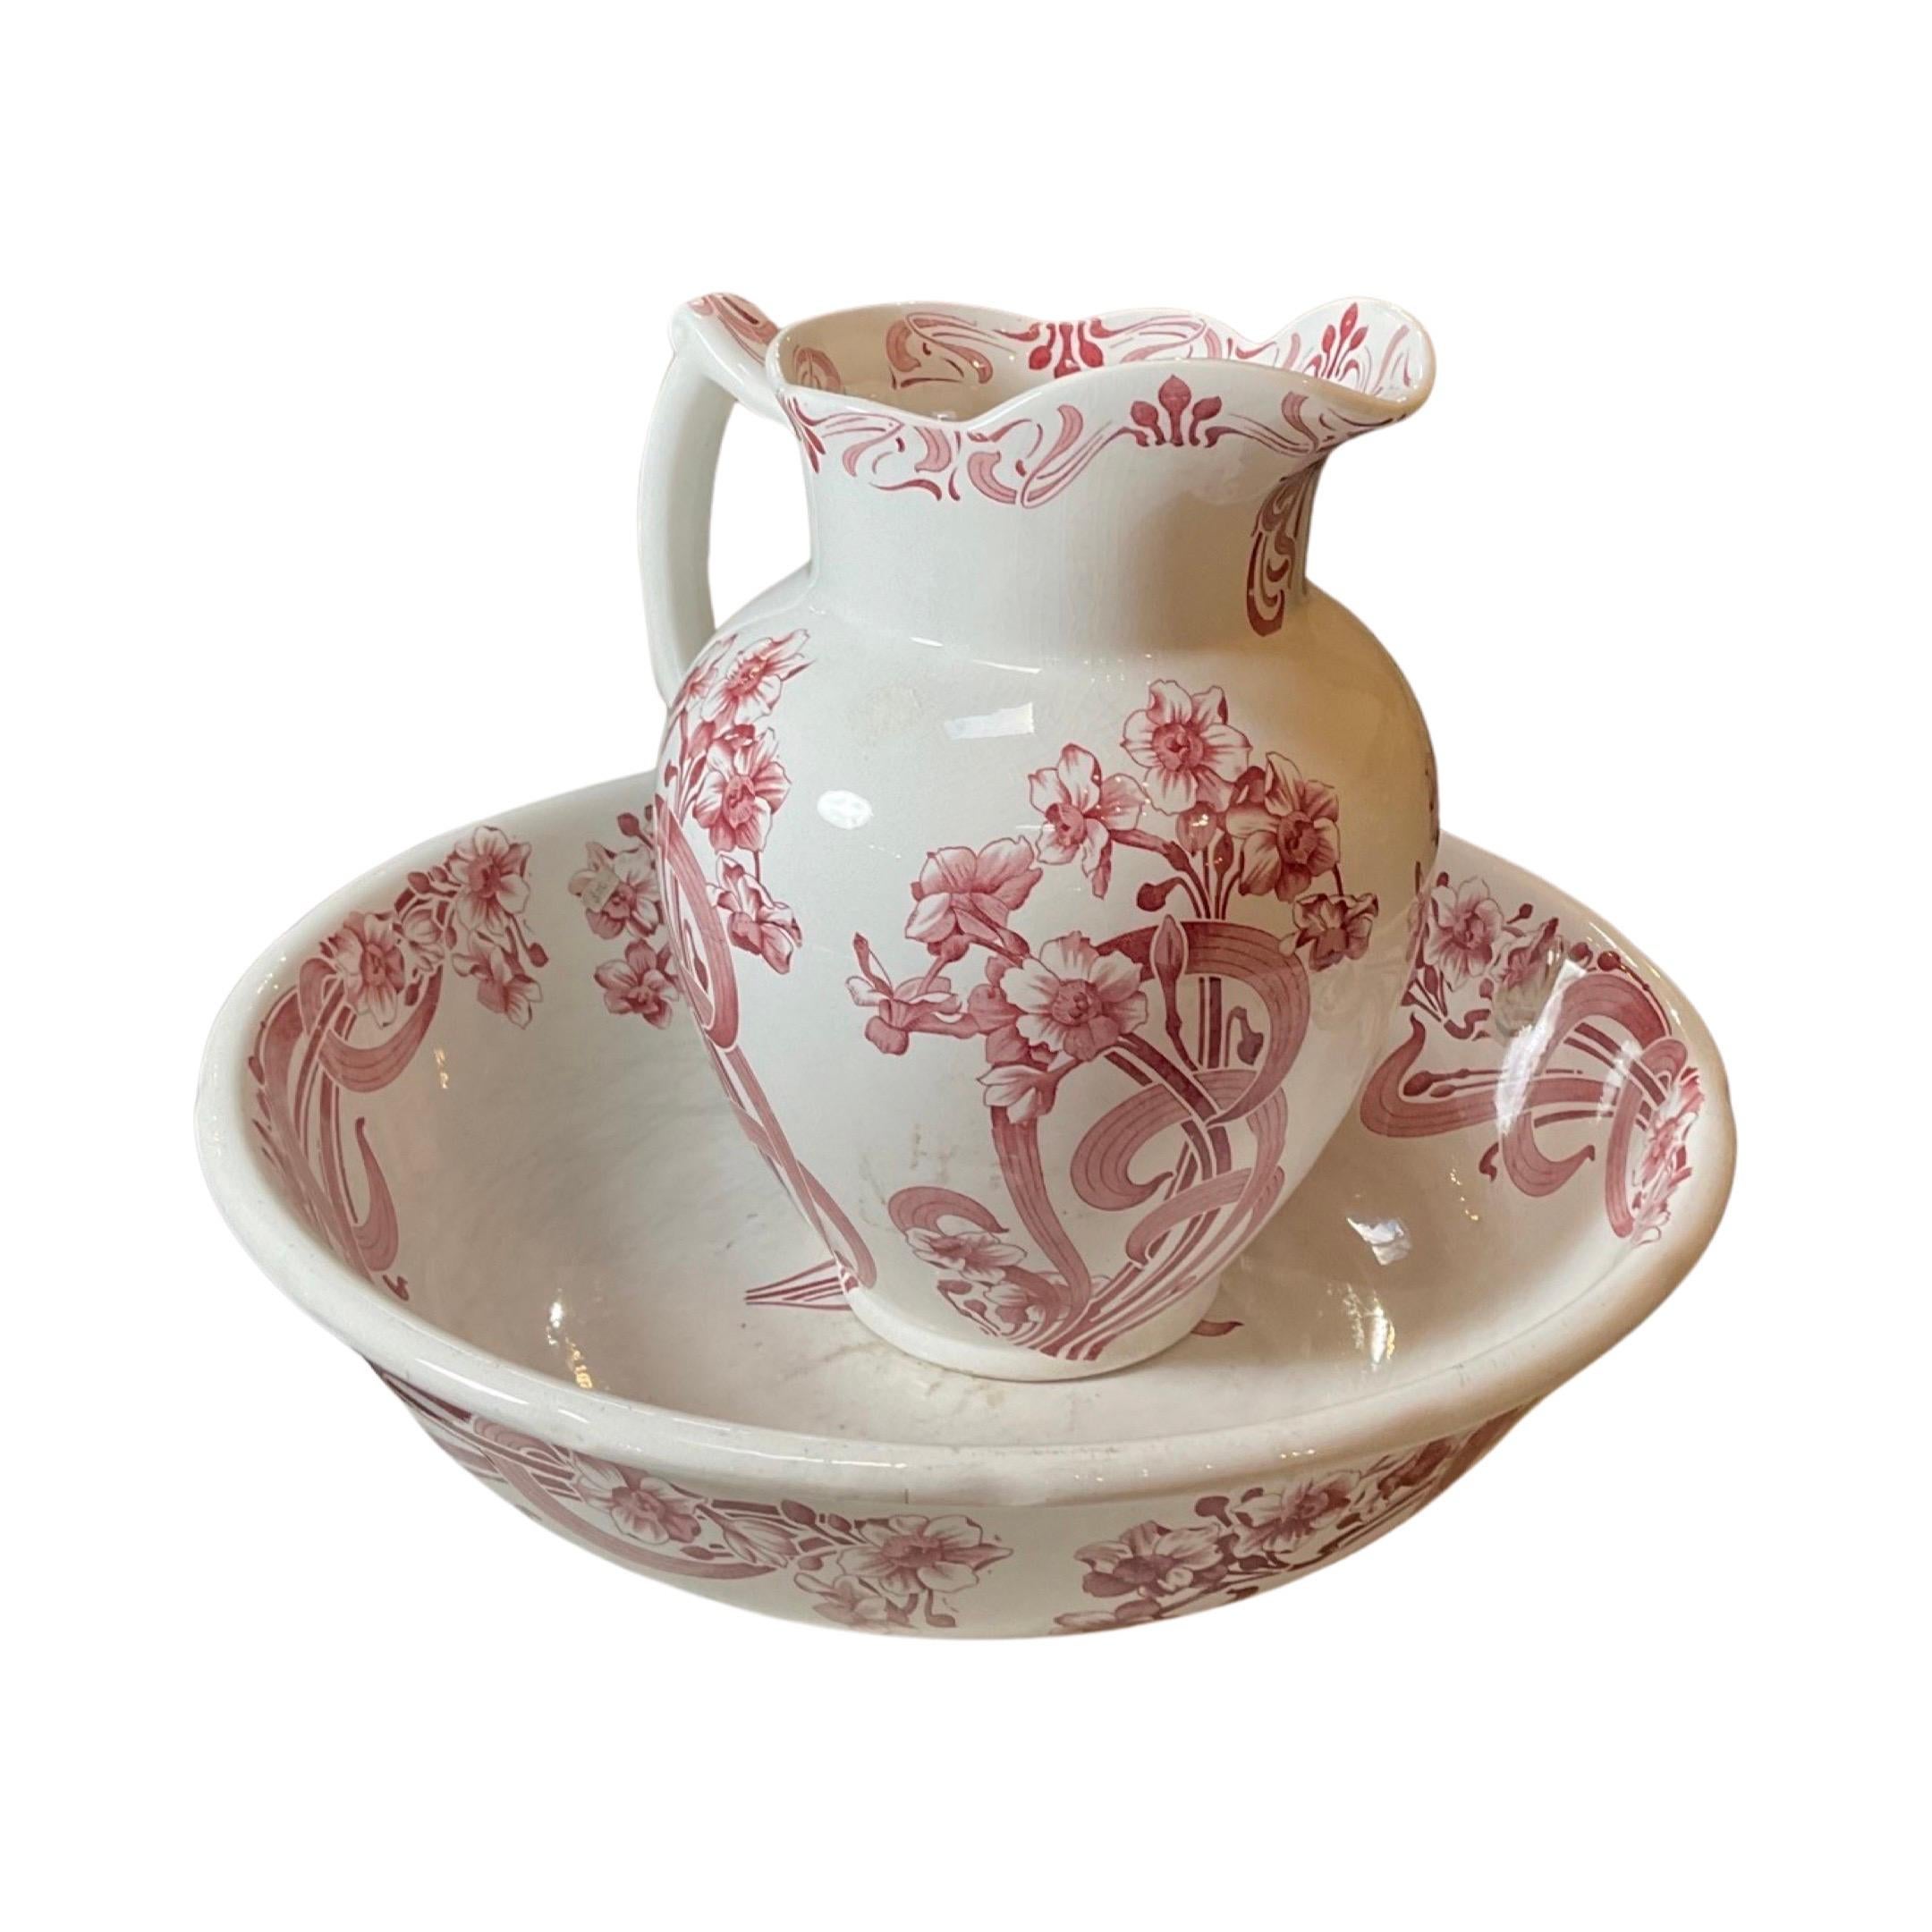 19th Century English Antique Porcelain Bowl and Pitcher For Sale